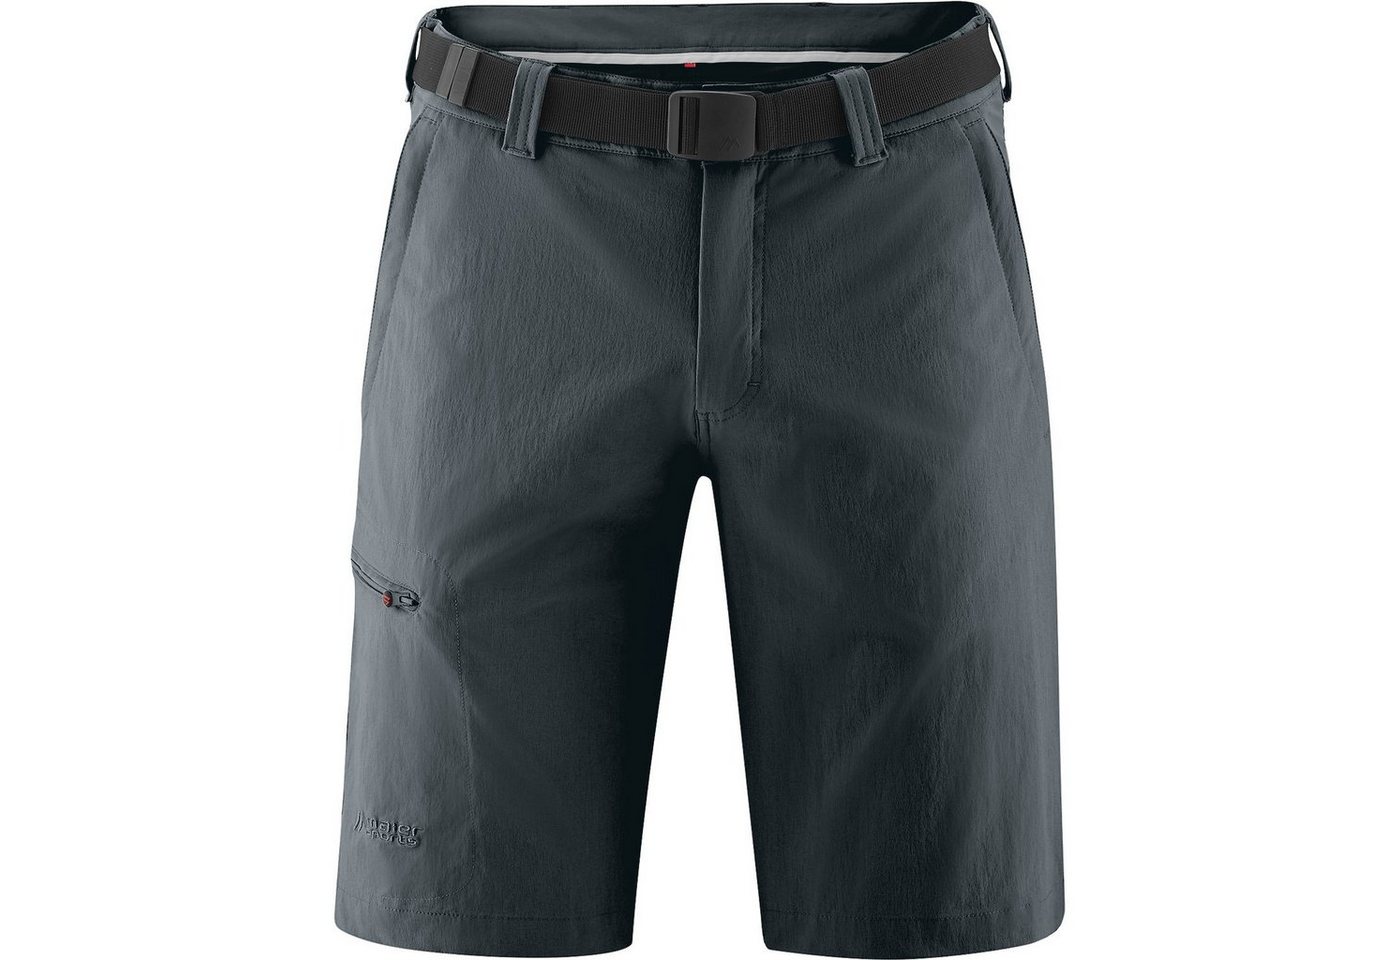 Maier Sports Funktionsshorts Wandershorts Huang von Maier Sports